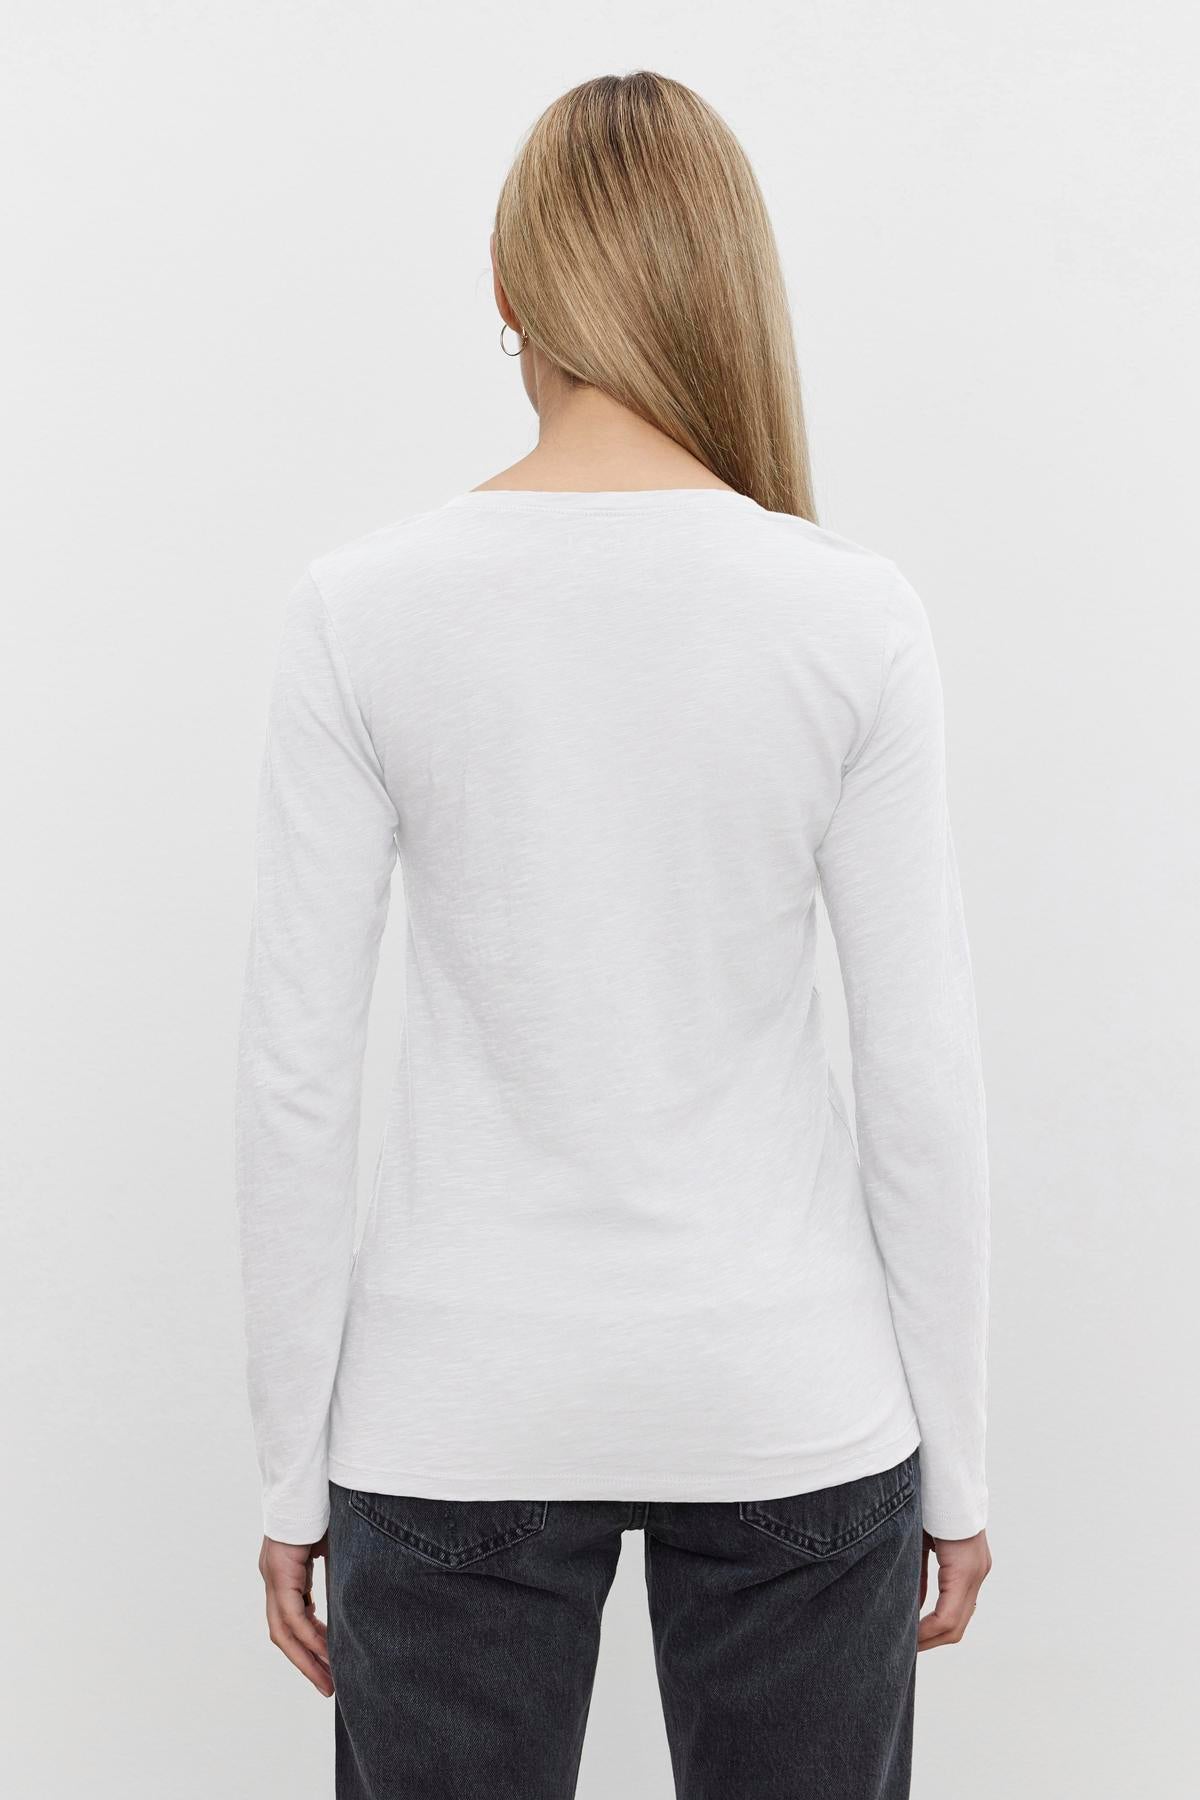 A person with long, straight hair wearing a white BLAIRE TEE by Velvet by Graham & Spencer and dark jeans is shown from the back against a plain background.-37377300136129